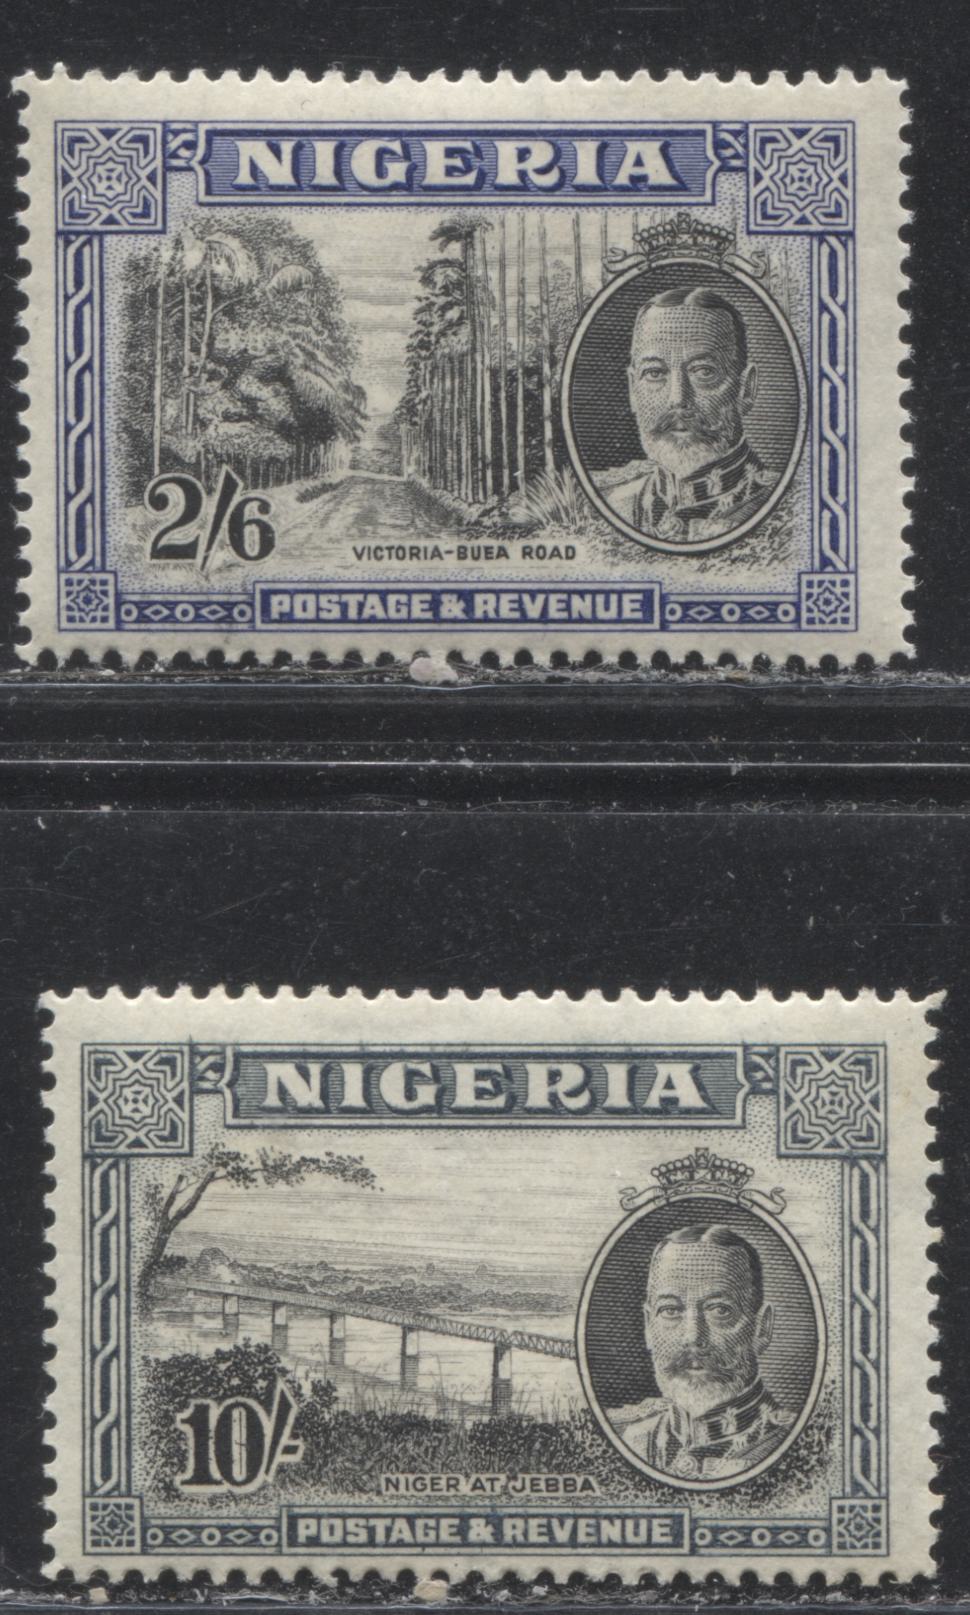 Lot 278 Nigeria SG# 42,44 2/6d, 10/- Black & Ultramarine and Black and Slate Victoria Buea Road, River Niger at Jebba, 1936 Pictorial Issue, Two Fine NH Example